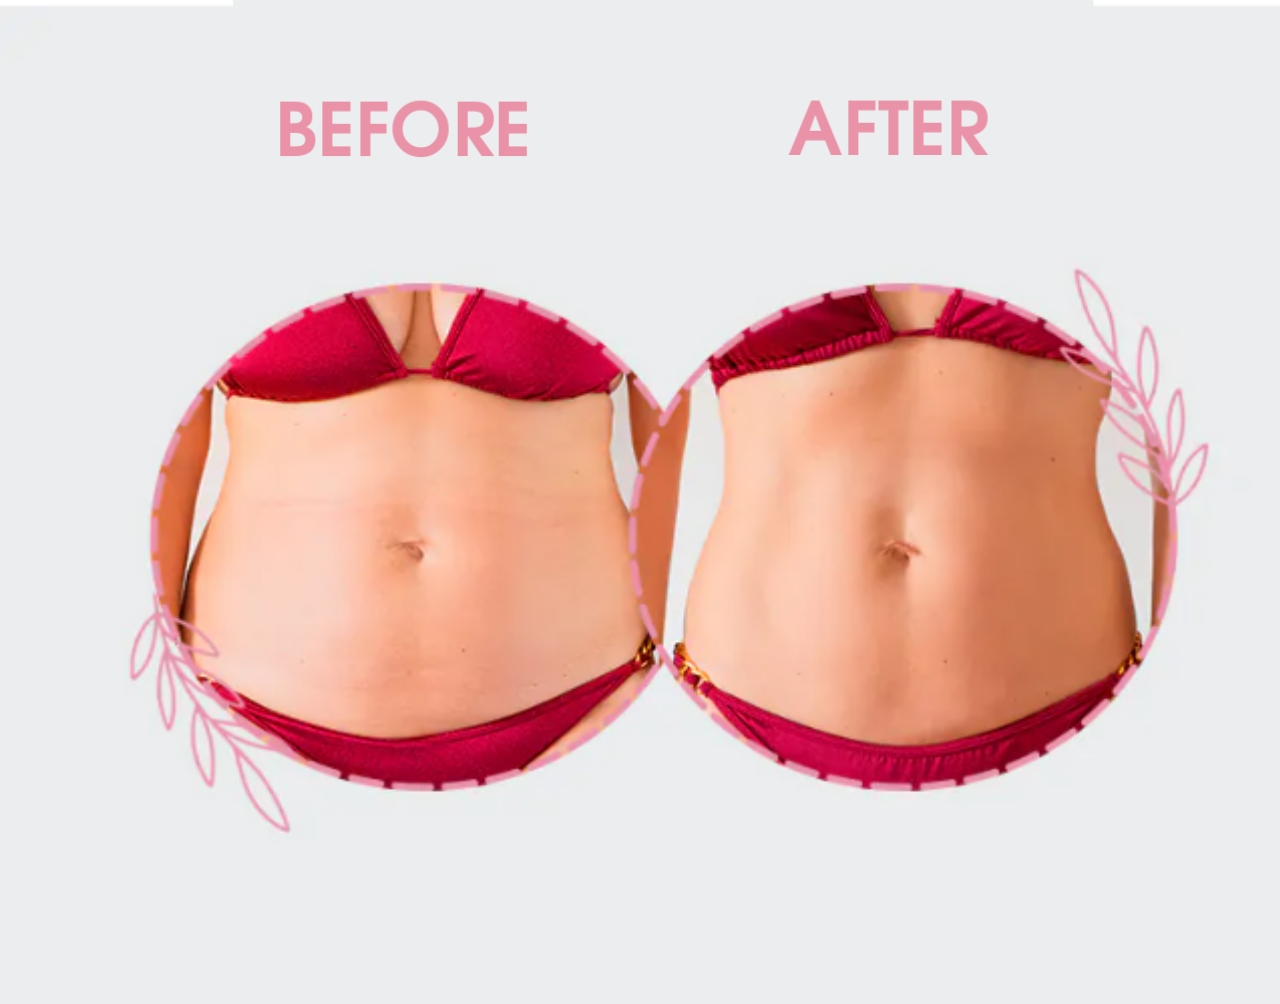 Tummy Tuck Before And After: See Photos Of Celebrities And Discover How To Have A Great Result!